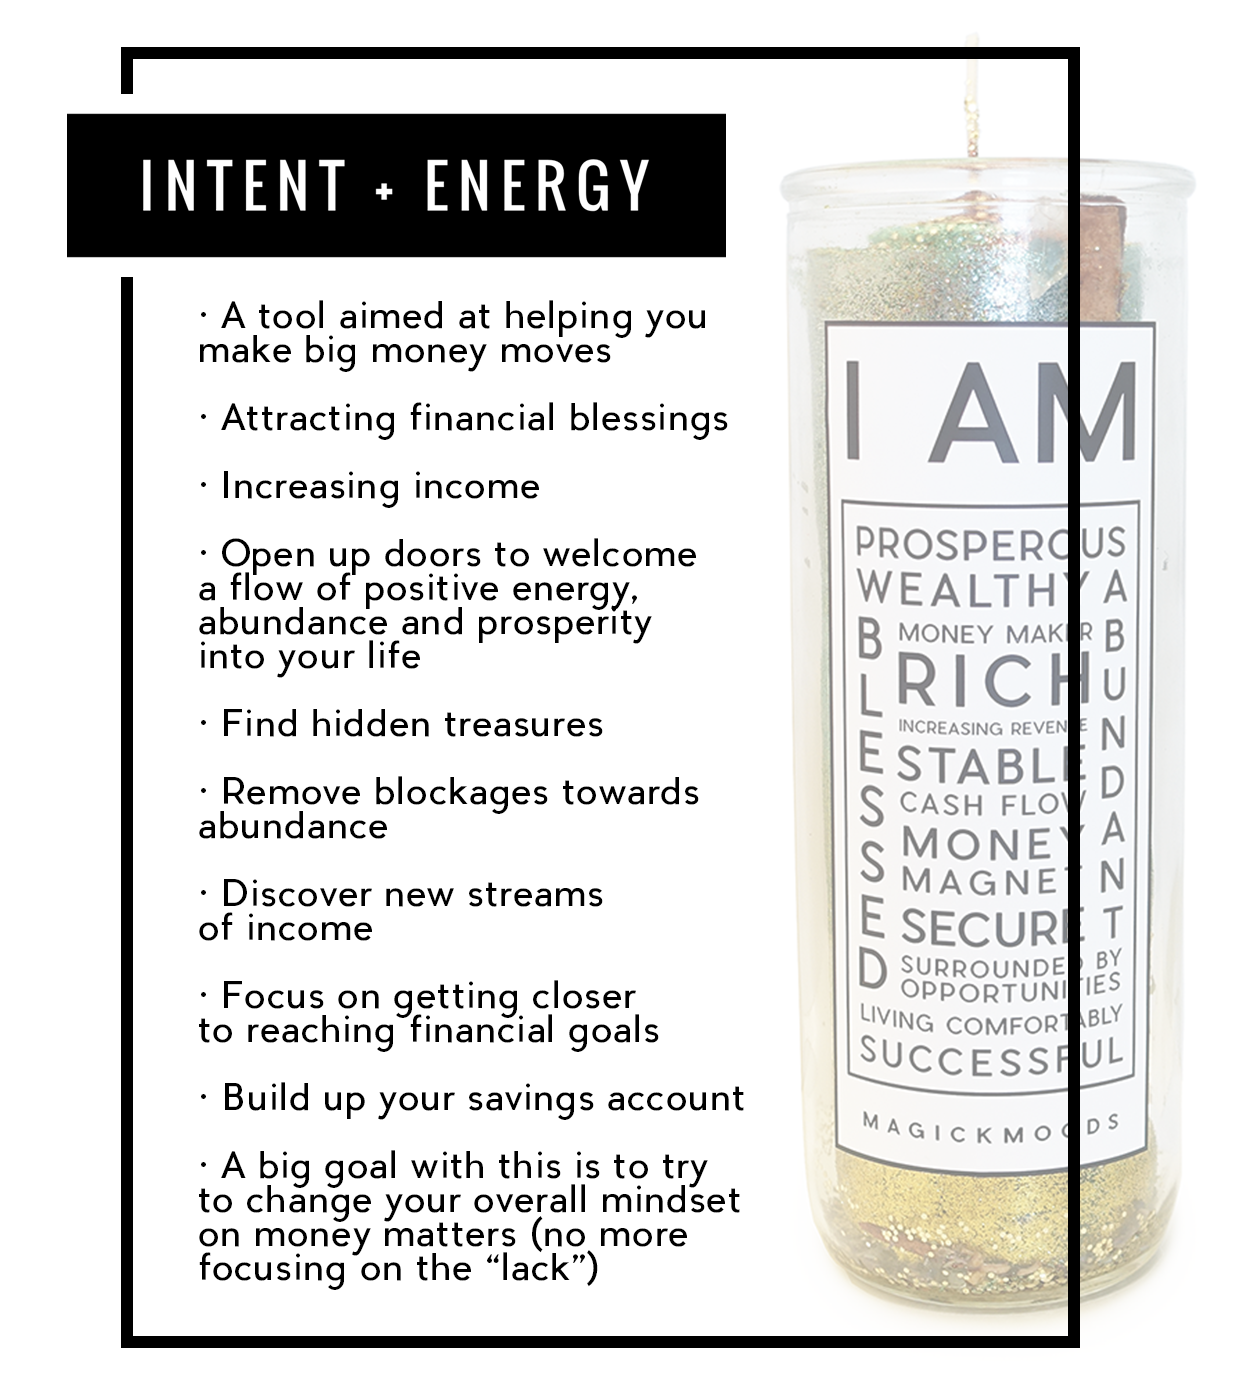 I Am Prosperous 7-Day Meditation Candle - PREORDER - Ships by July 28th, 2023